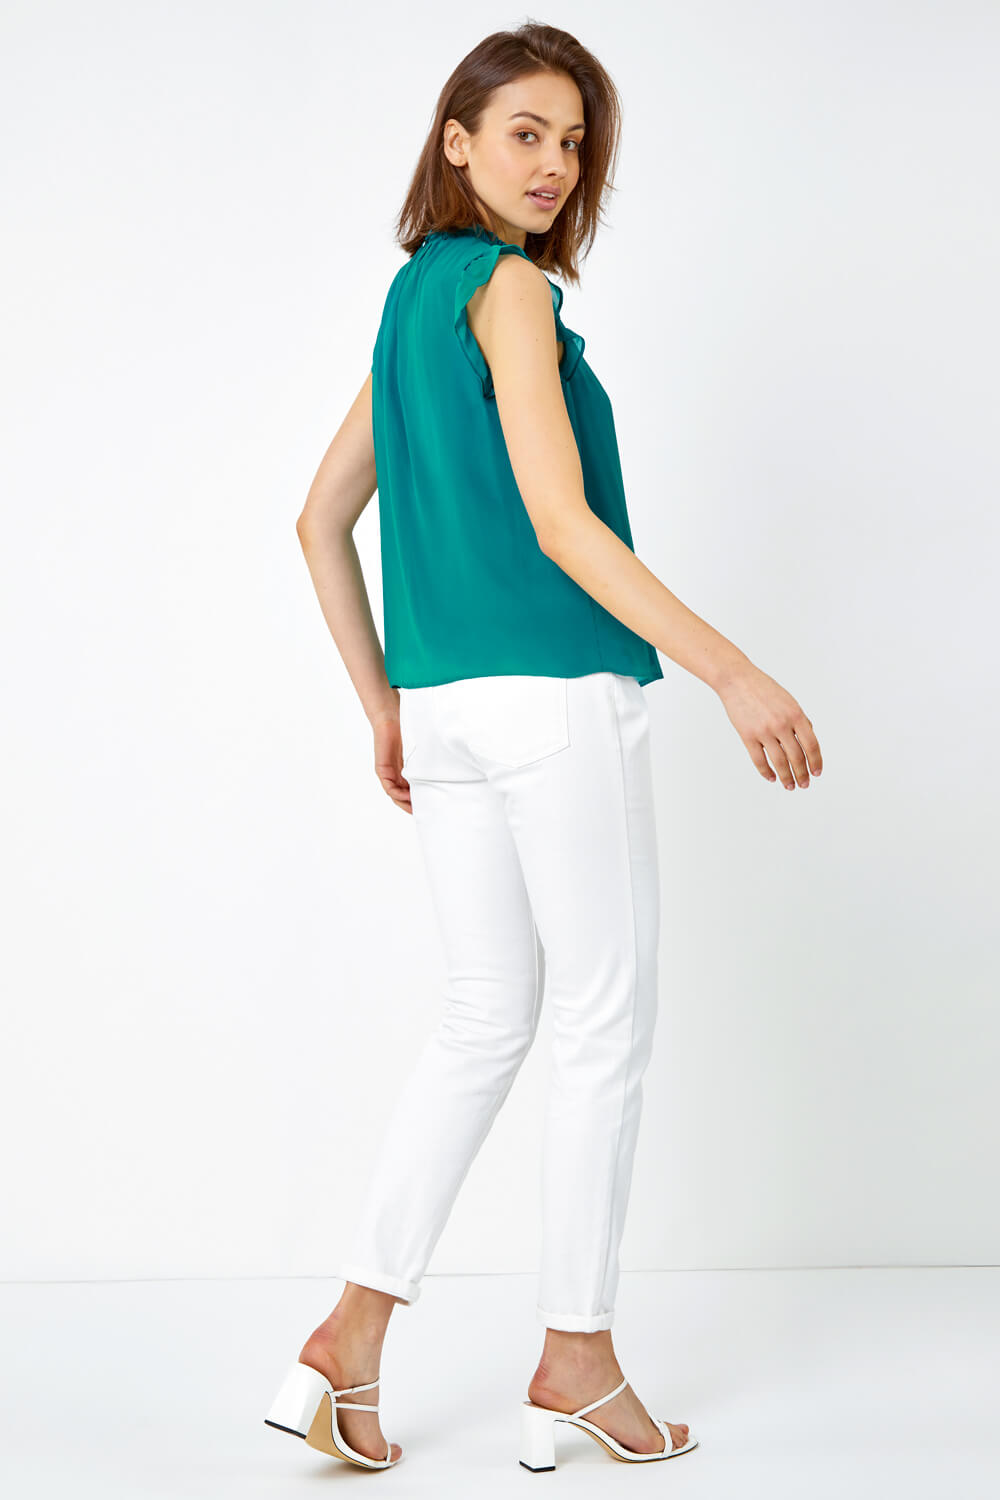 Teal Sleeveless High Neck Frill Top, Image 3 of 5